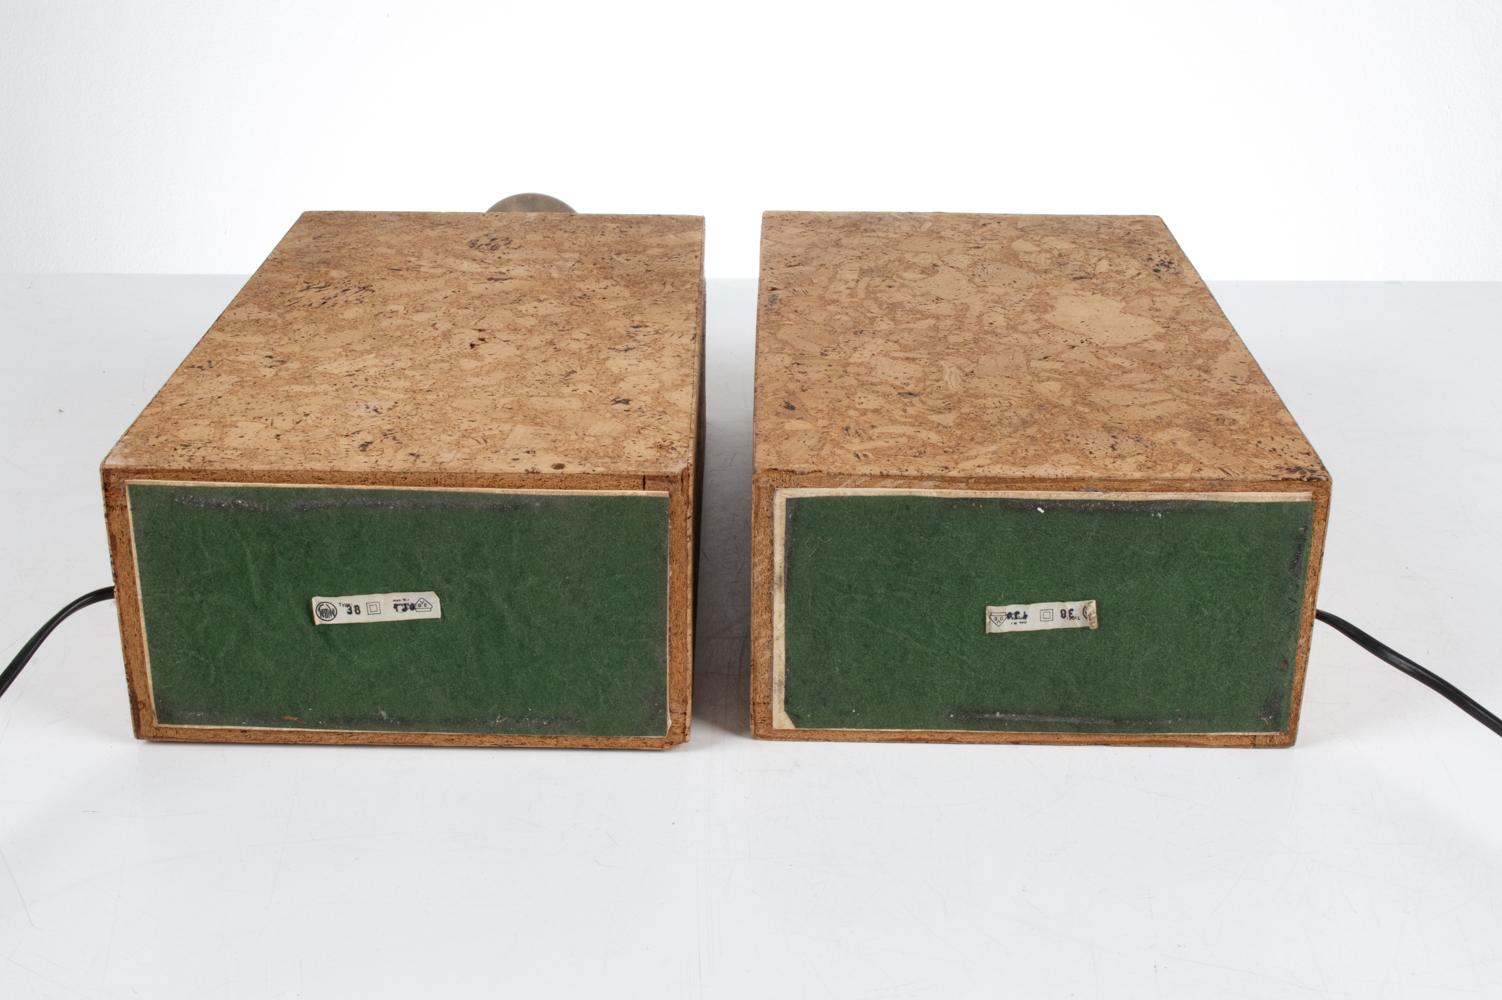 Pair of Cork Monolith Table Lamps in the Stye of Ingo Maurer, c. 1970's For Sale 9